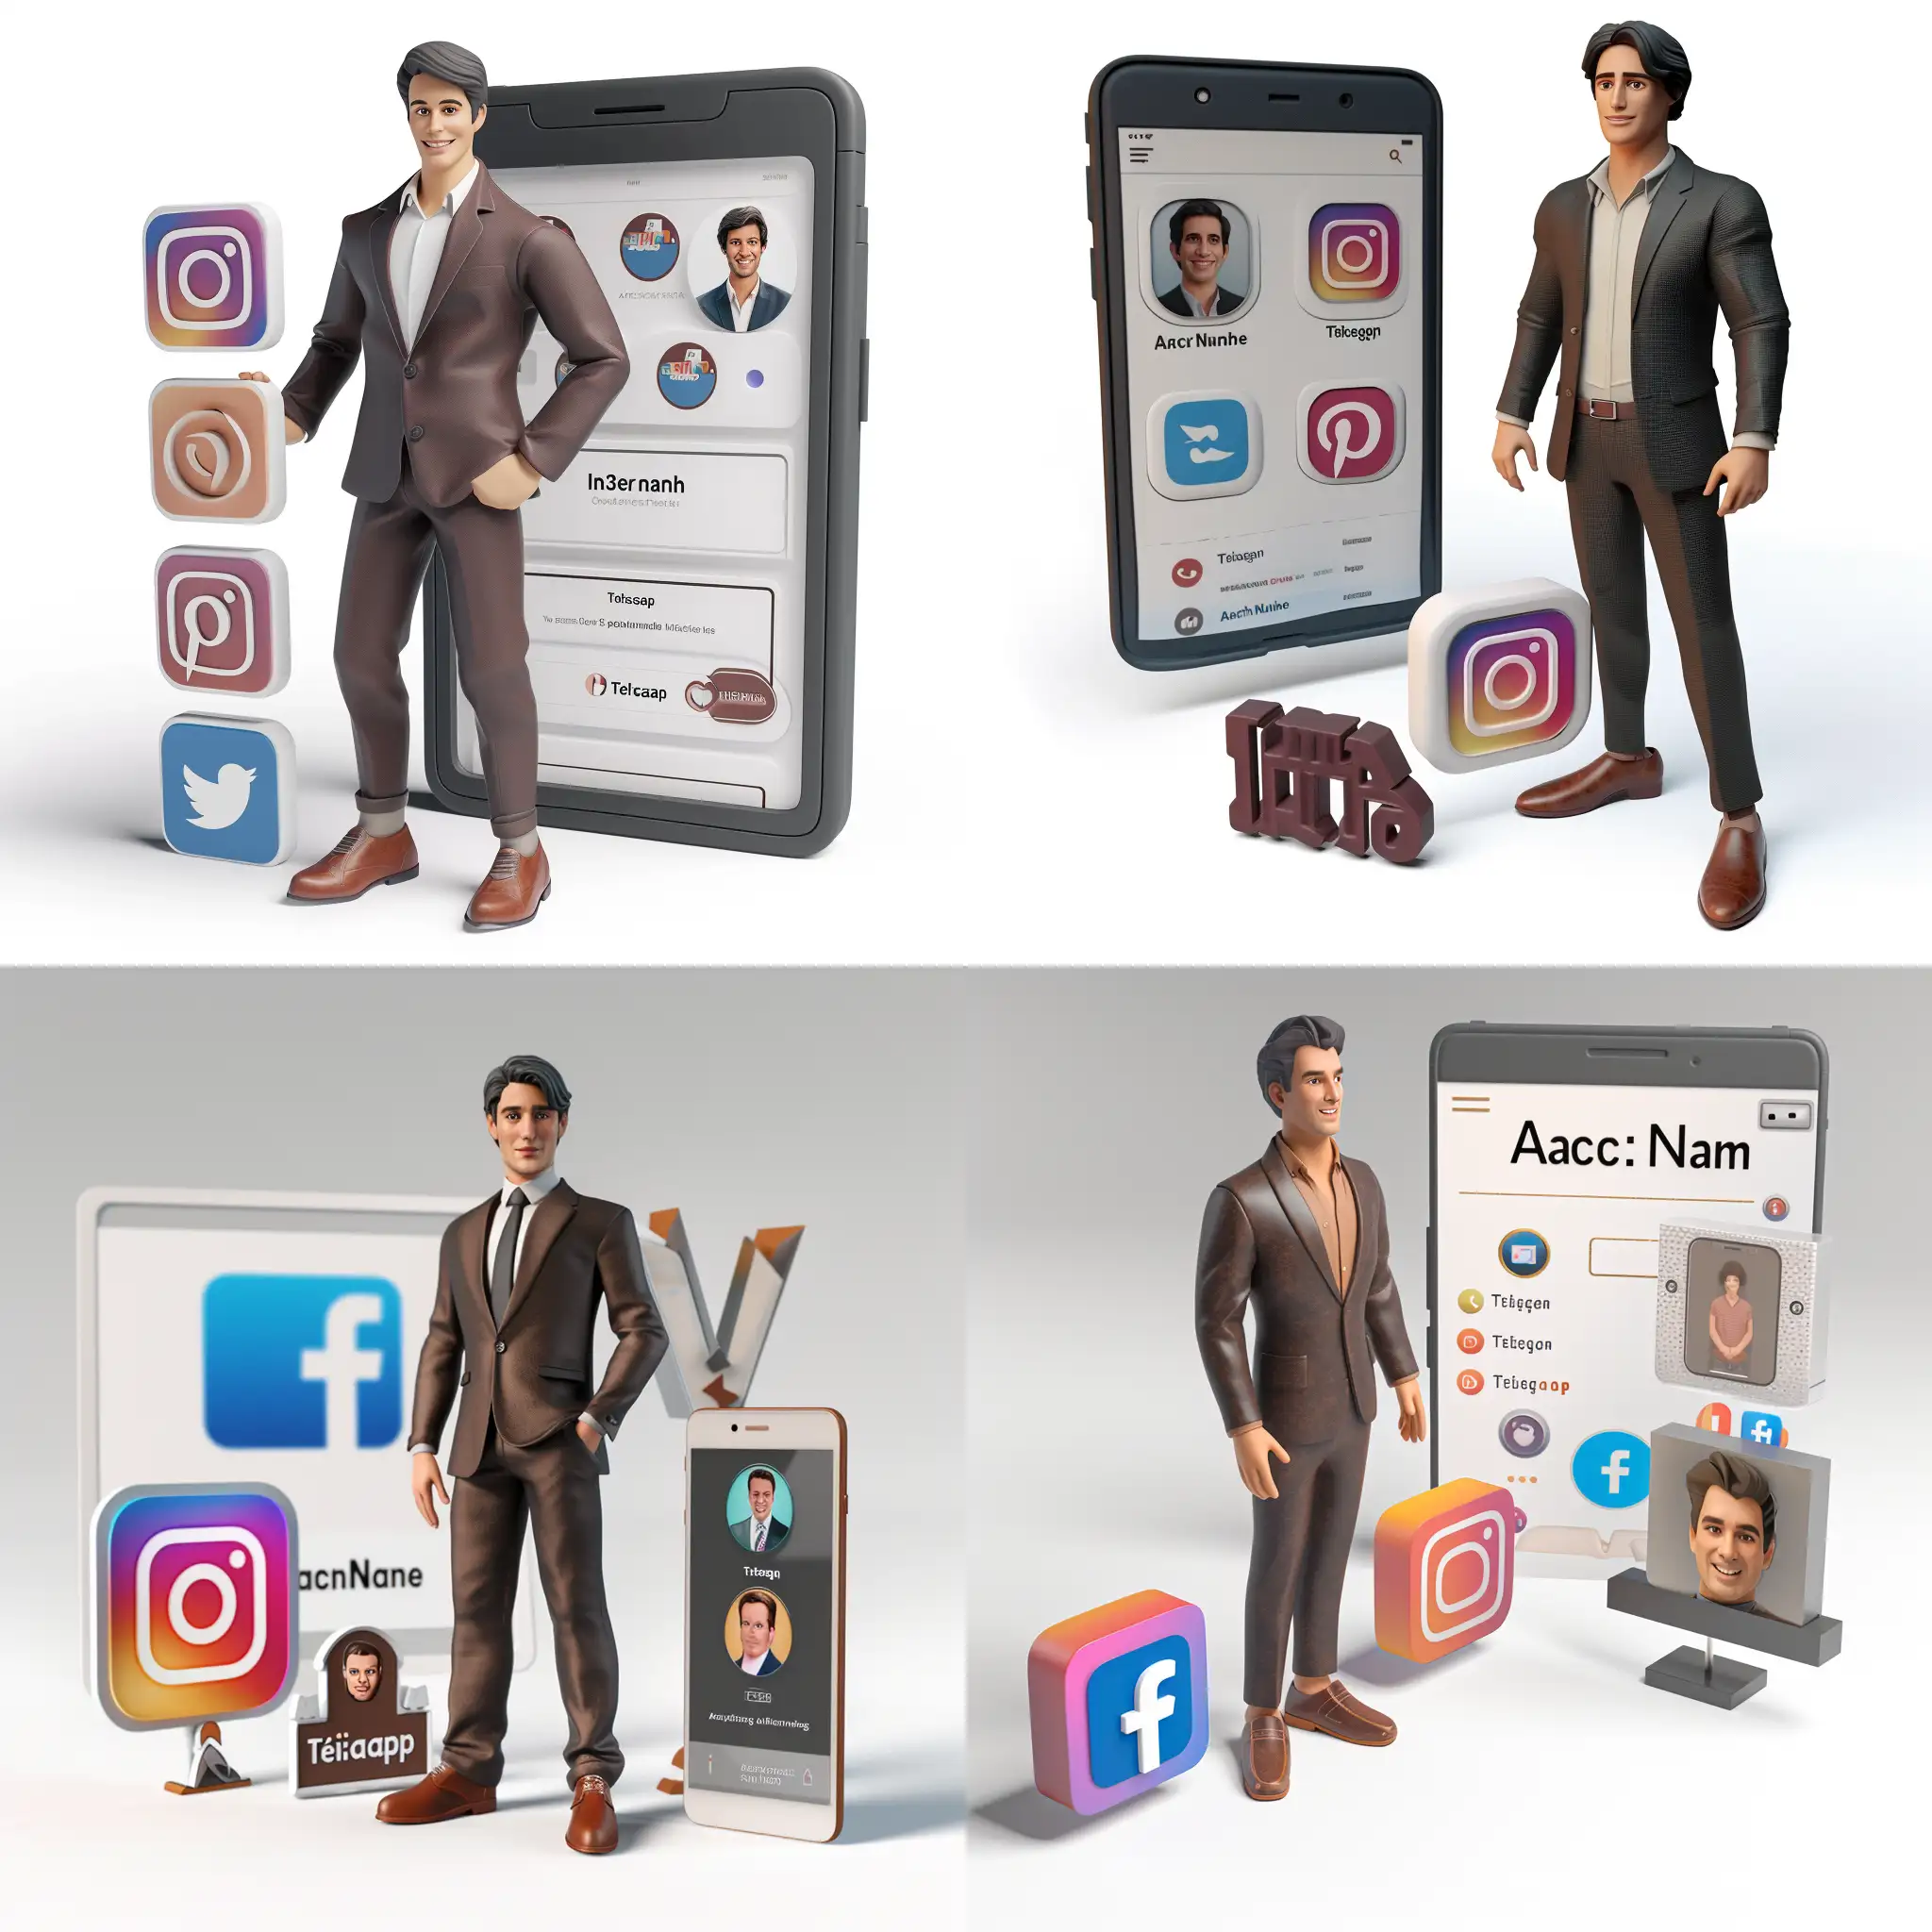 Create a 3D image of a man whose job is advertising in the virtual space, standing next to the logos of the social networks "Instagram", "Telegram" and "WhatsApp". The character should wear formal clothes such as a suit and leather shoes. The background image is an "Instagram" social media profile page with the username "Account Name" and a matching profile picture.